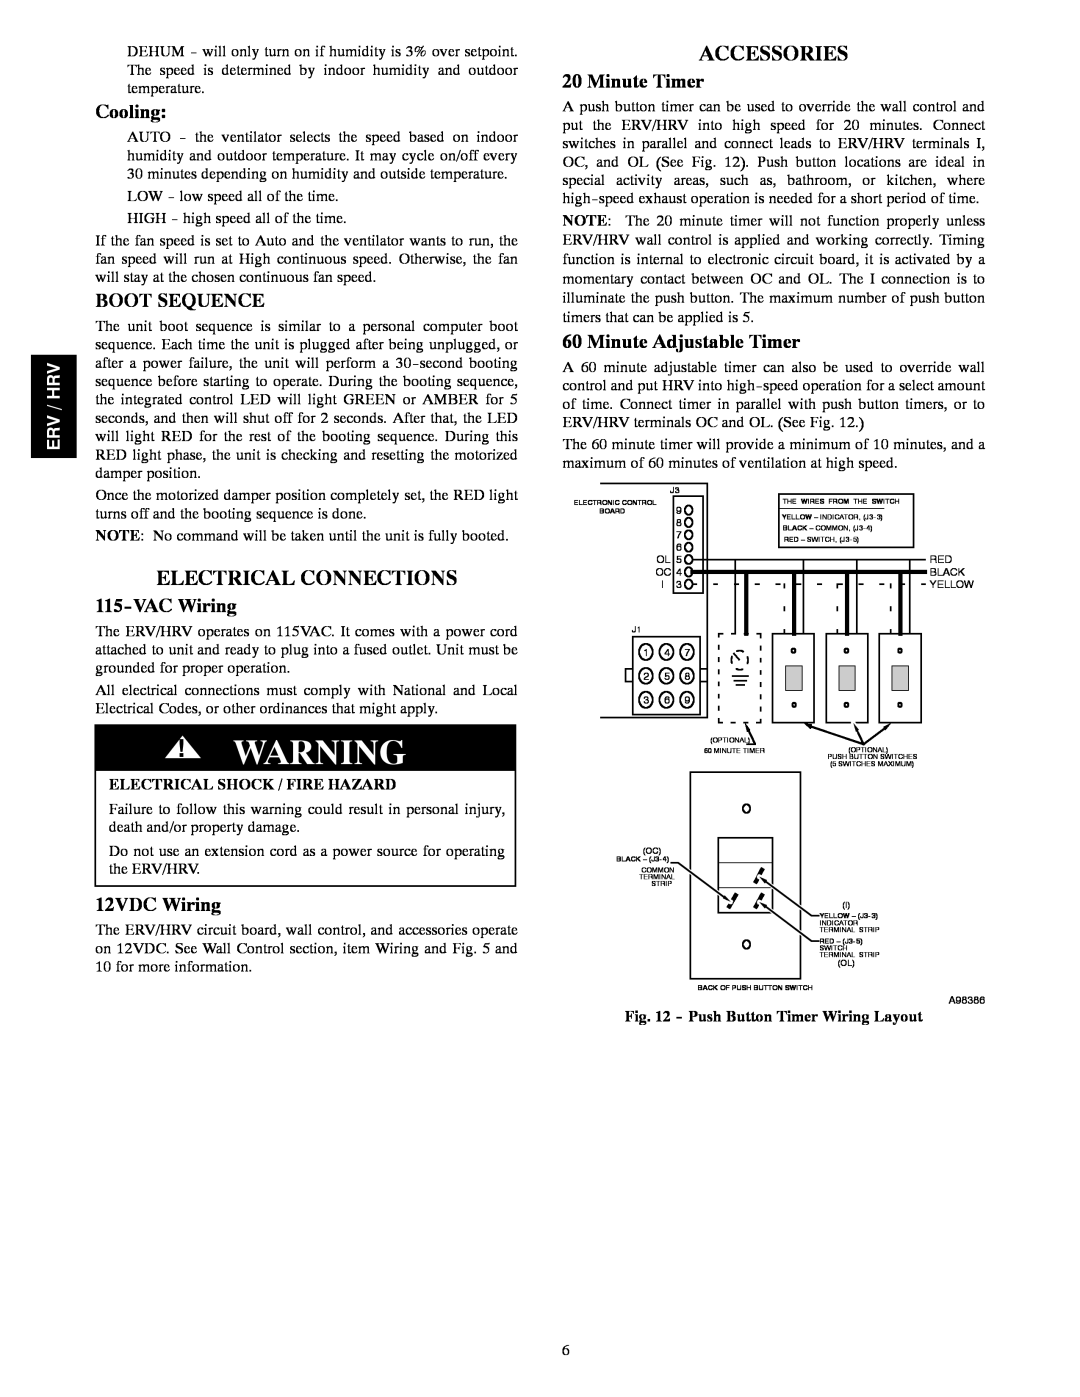 Bryant ERVBBSVA1100 Electrical Connections, Accessories, Cooling, Boot Sequence, VAC Wiring, 12VDC Wiring, Minute Timer 